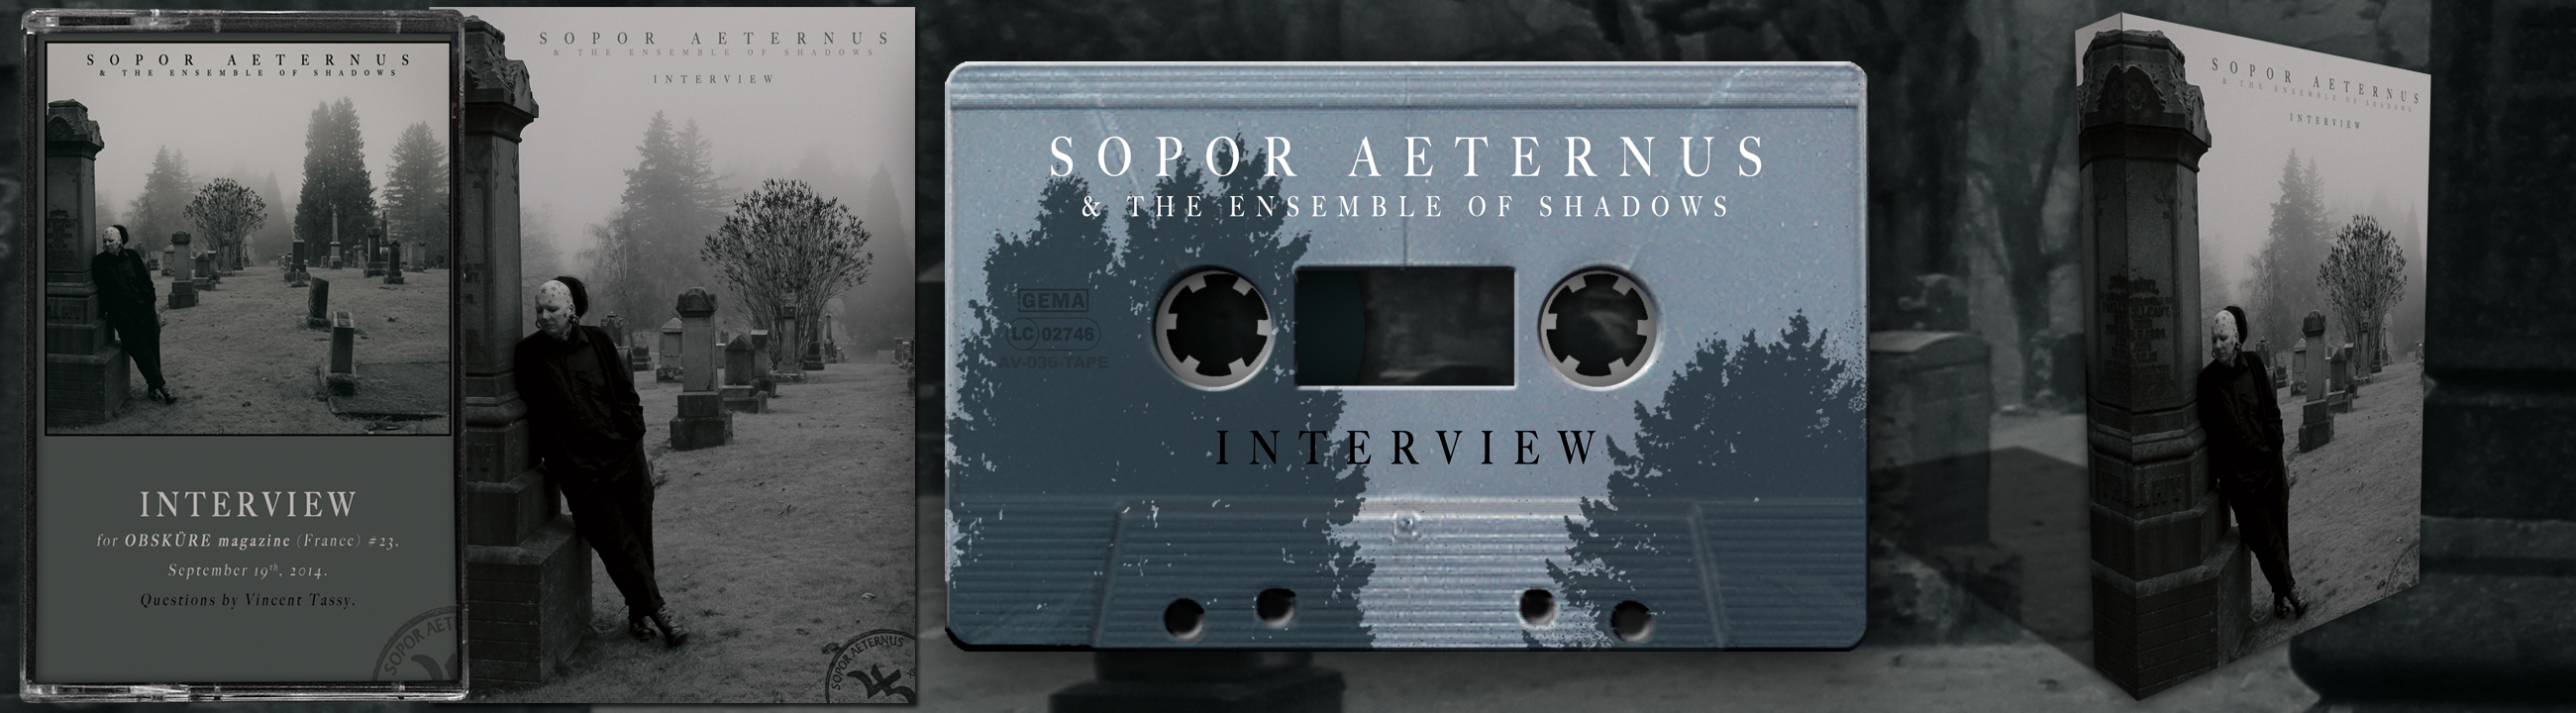 Interview_TAPE